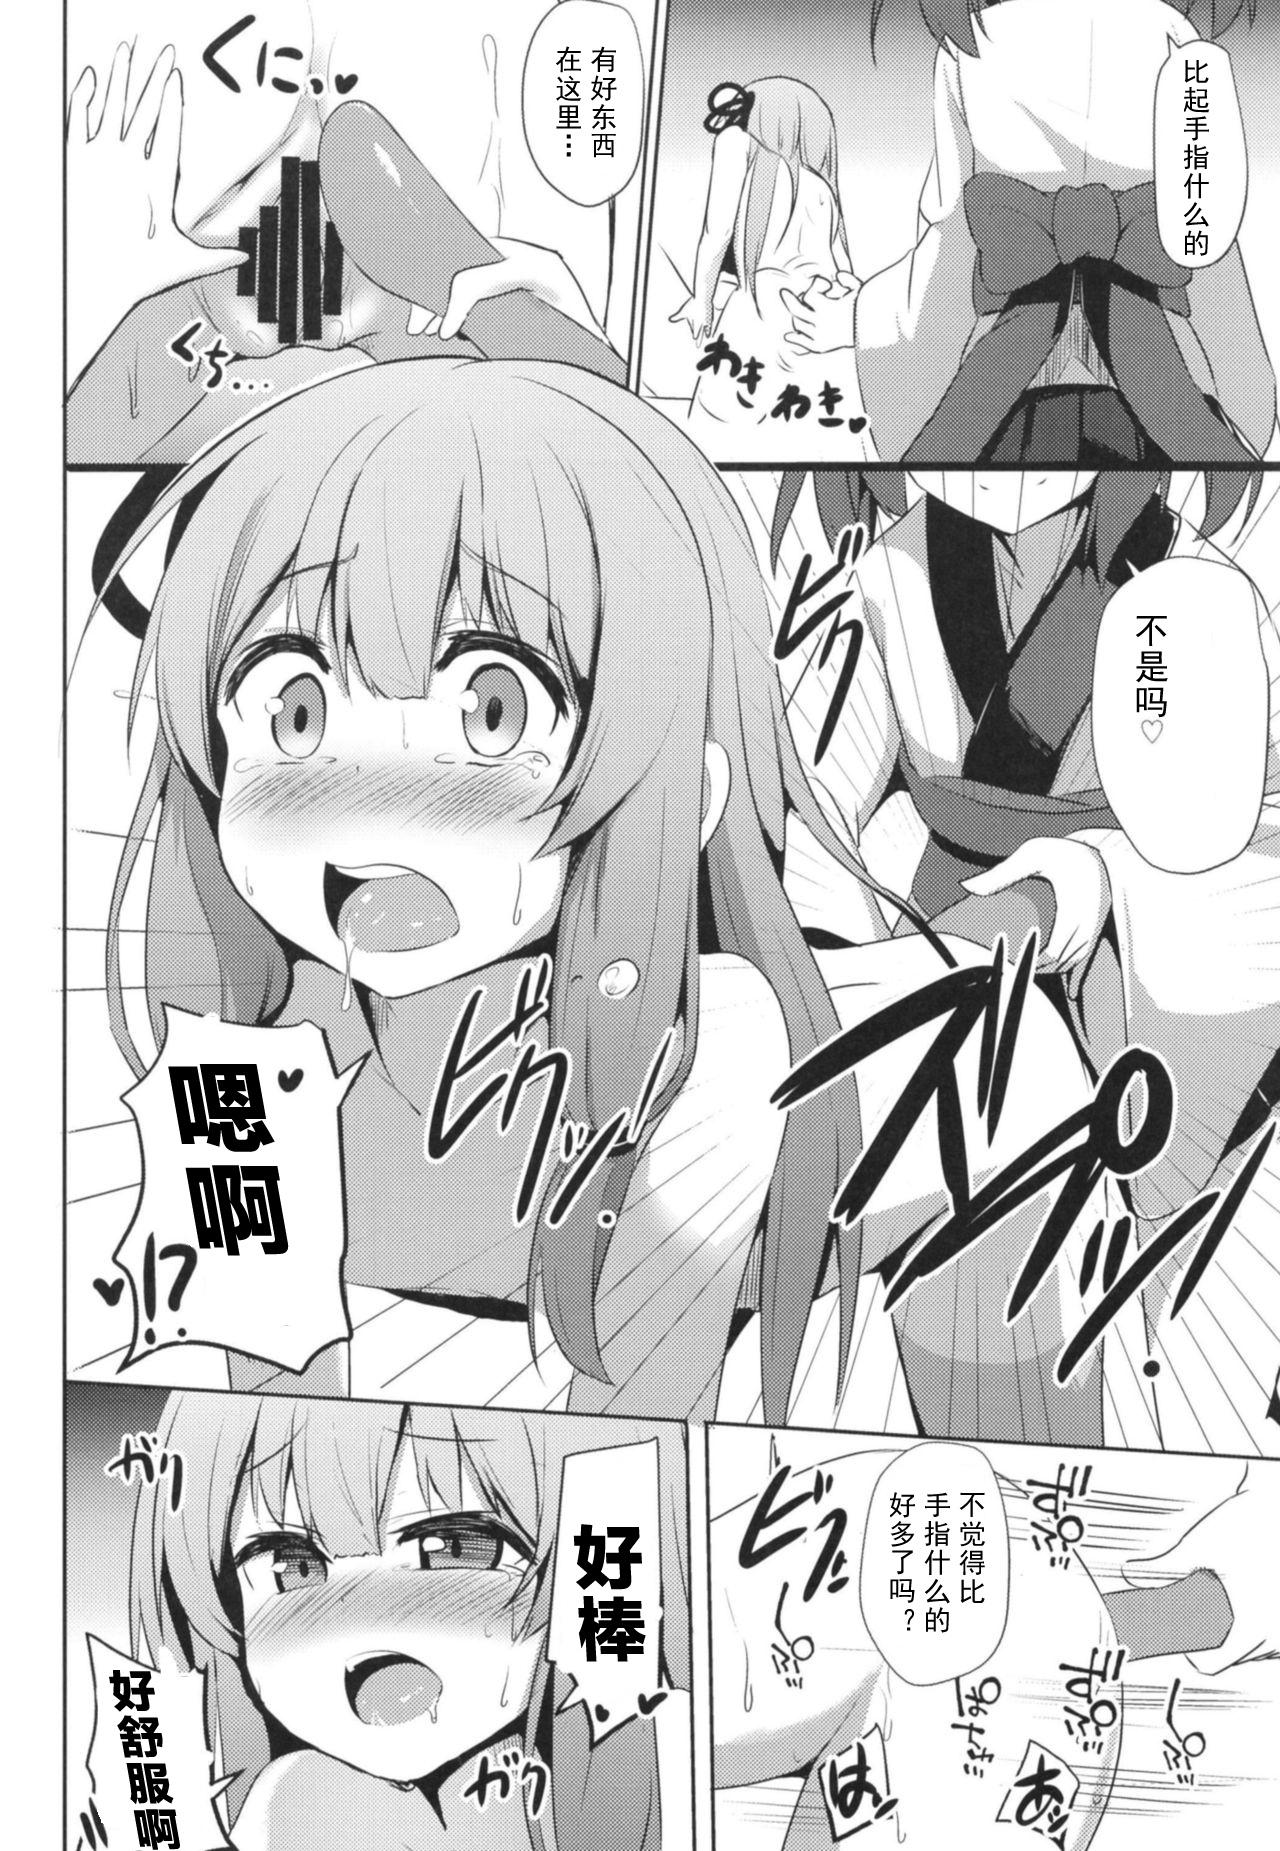 Police [Milk Pudding (Jamcy)] Akane-chan Challenge! 4-kaime (VOICEROID) [Chinese] [古早个人汉化] [Digital] - Voiceroid Free Blow Job Porn - Page 10